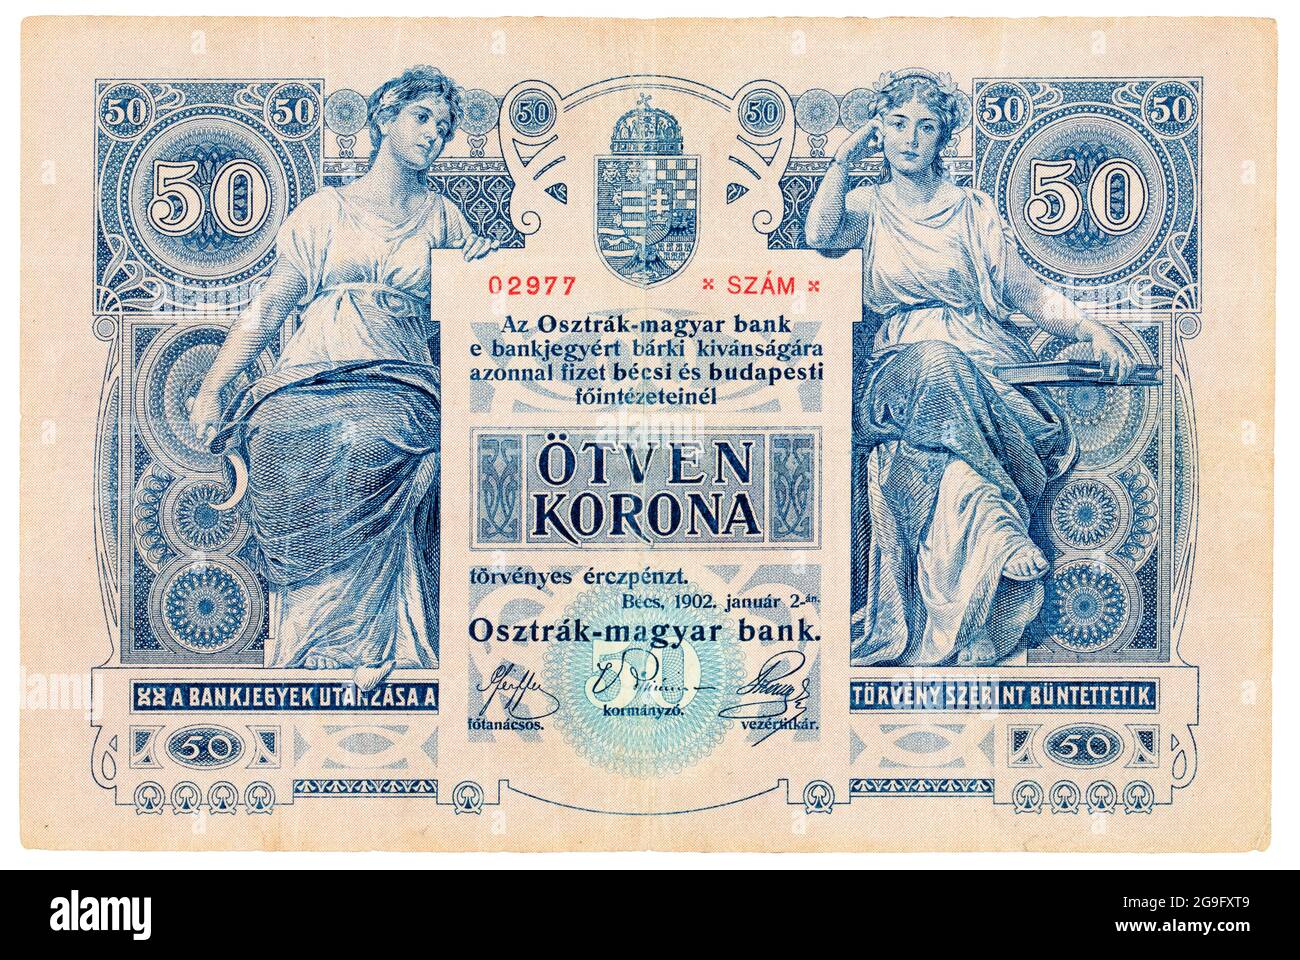 Design for a 50 Krone (Korona) banknote, Austro-Hungarian Empire currency, art by Gustav Klimt and Rudolf Rossler, 1902 Stock Photo